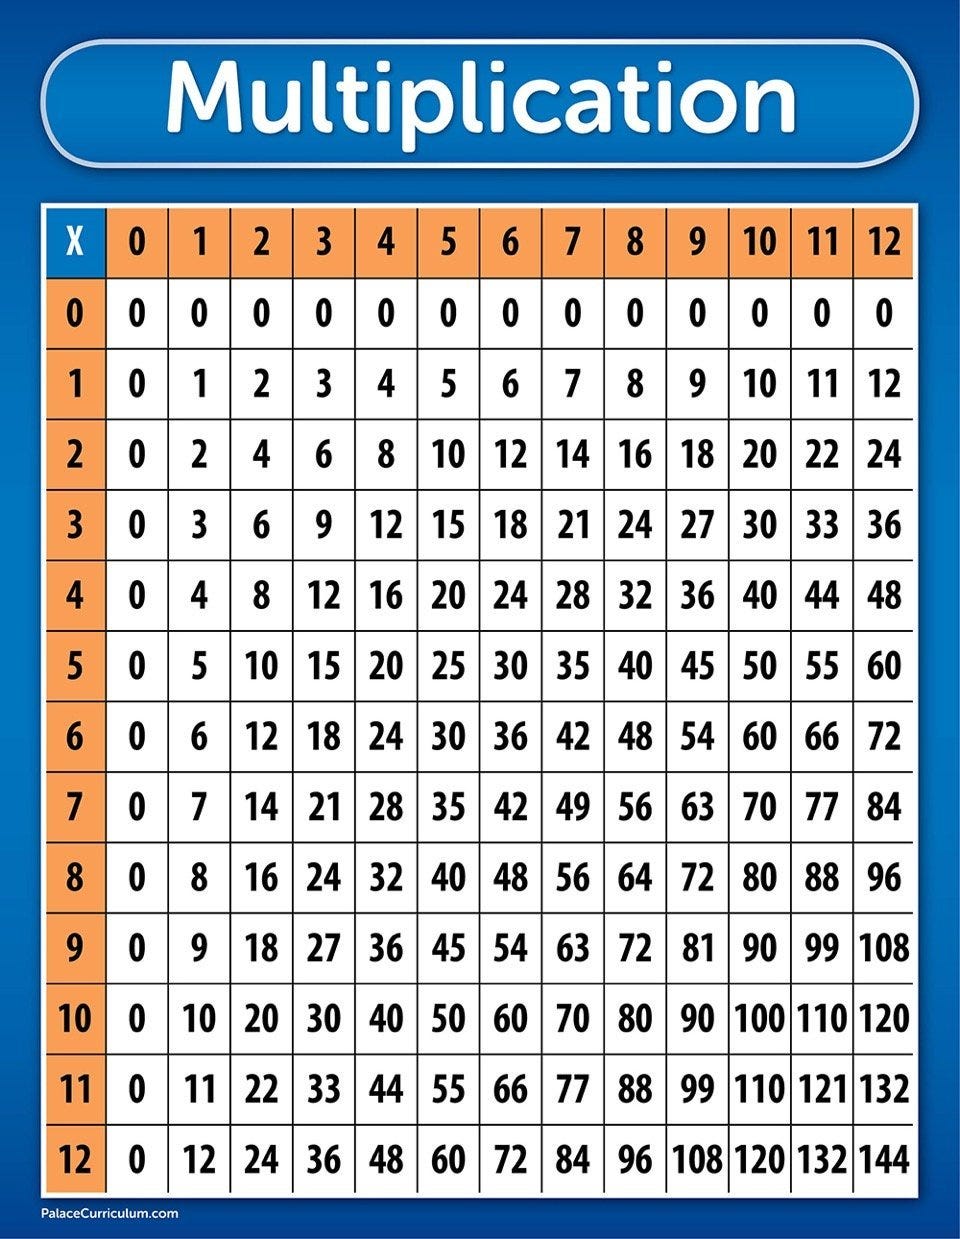 a new style of multiplication tables